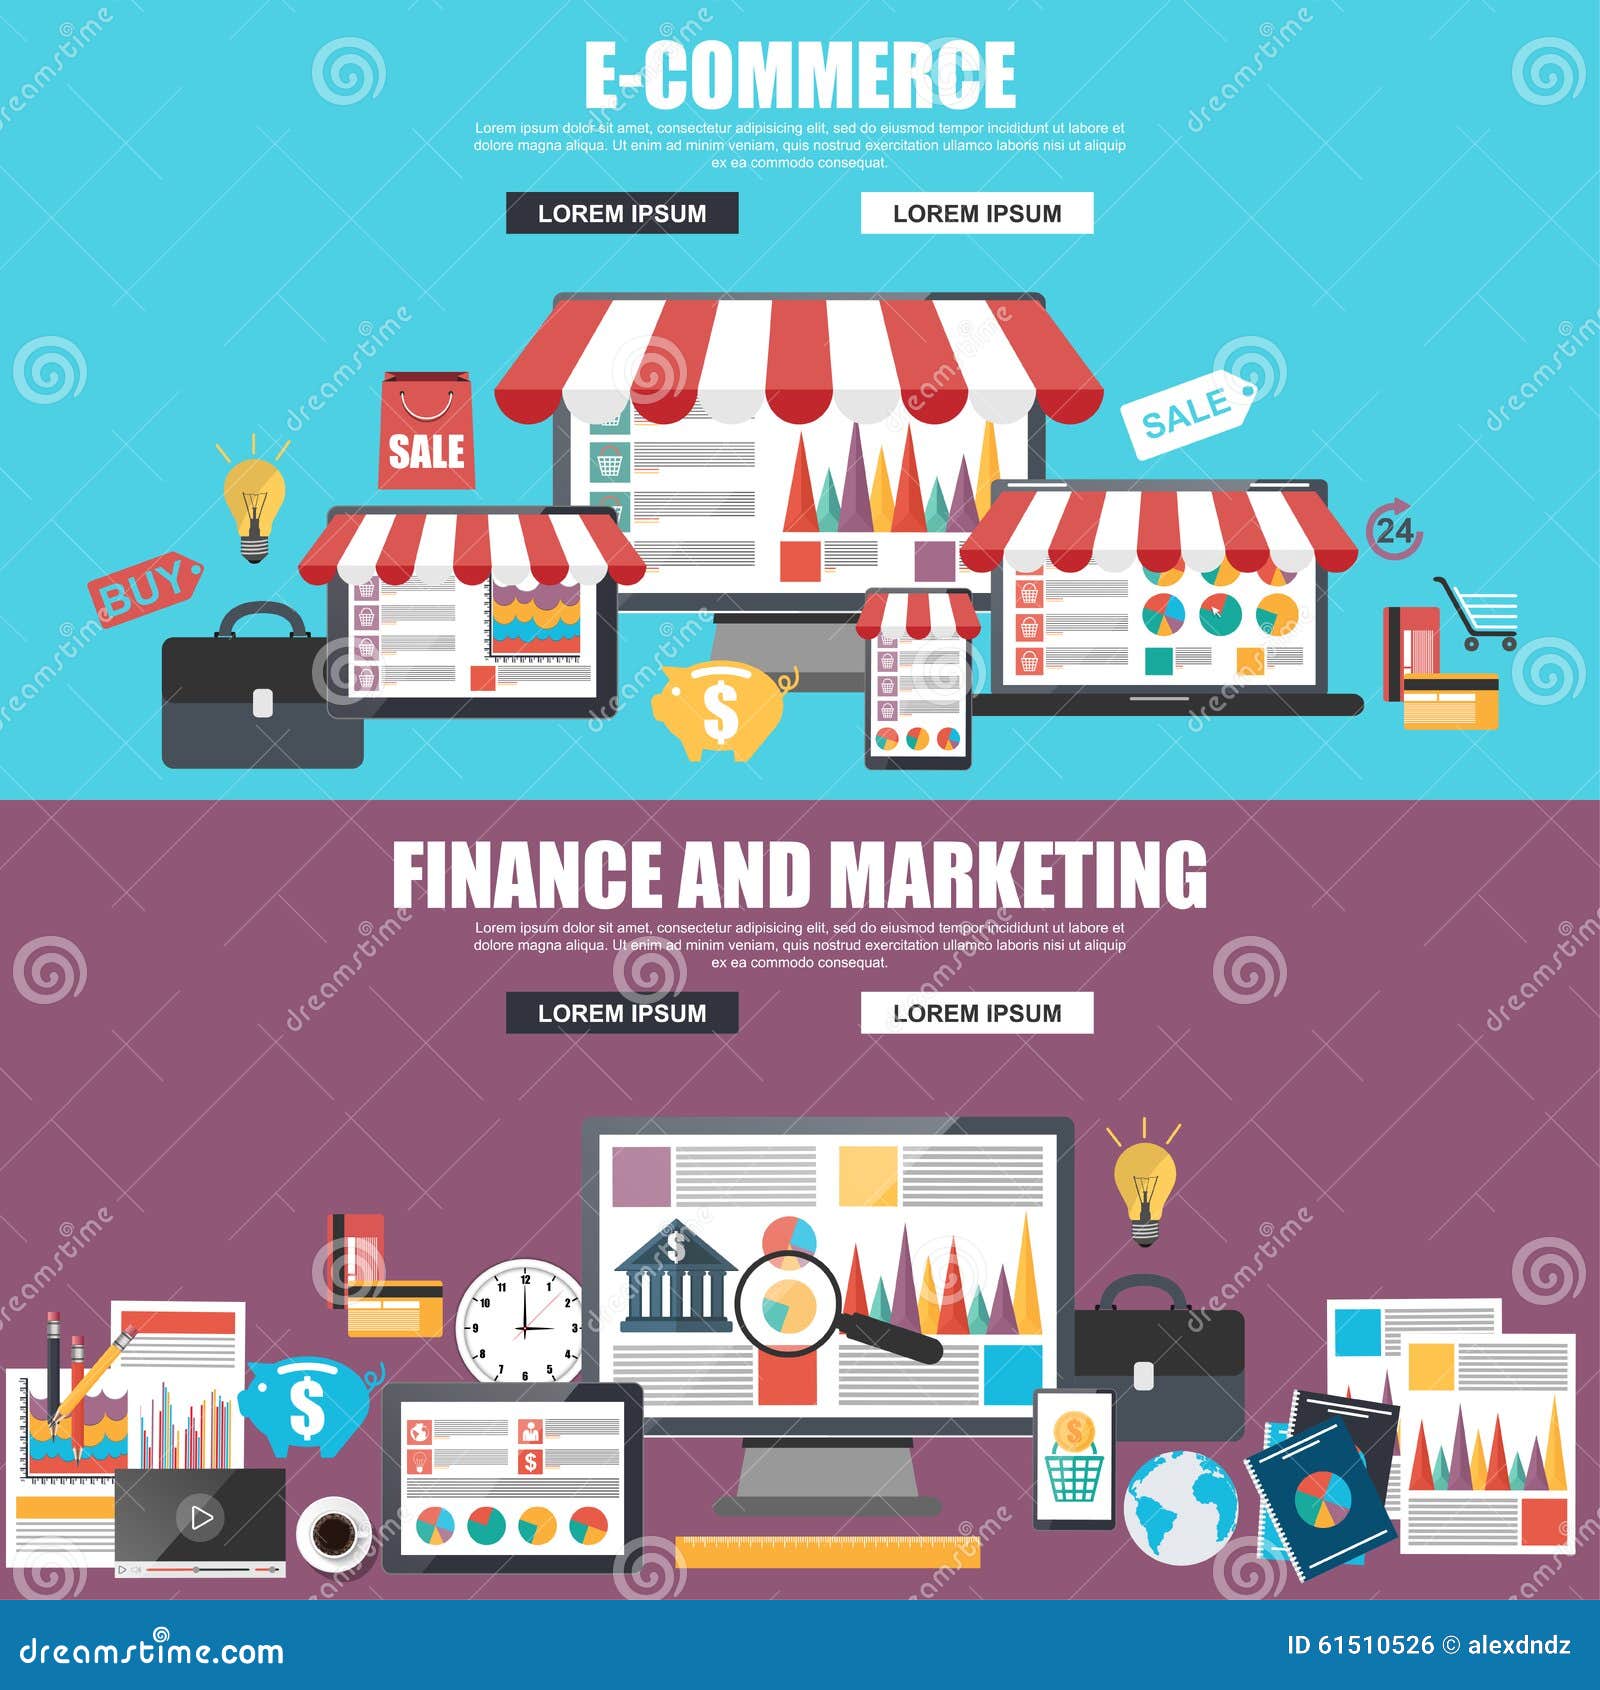 Flat Design Concepts For E-commerce, Marketing And Strategy Analysis ...